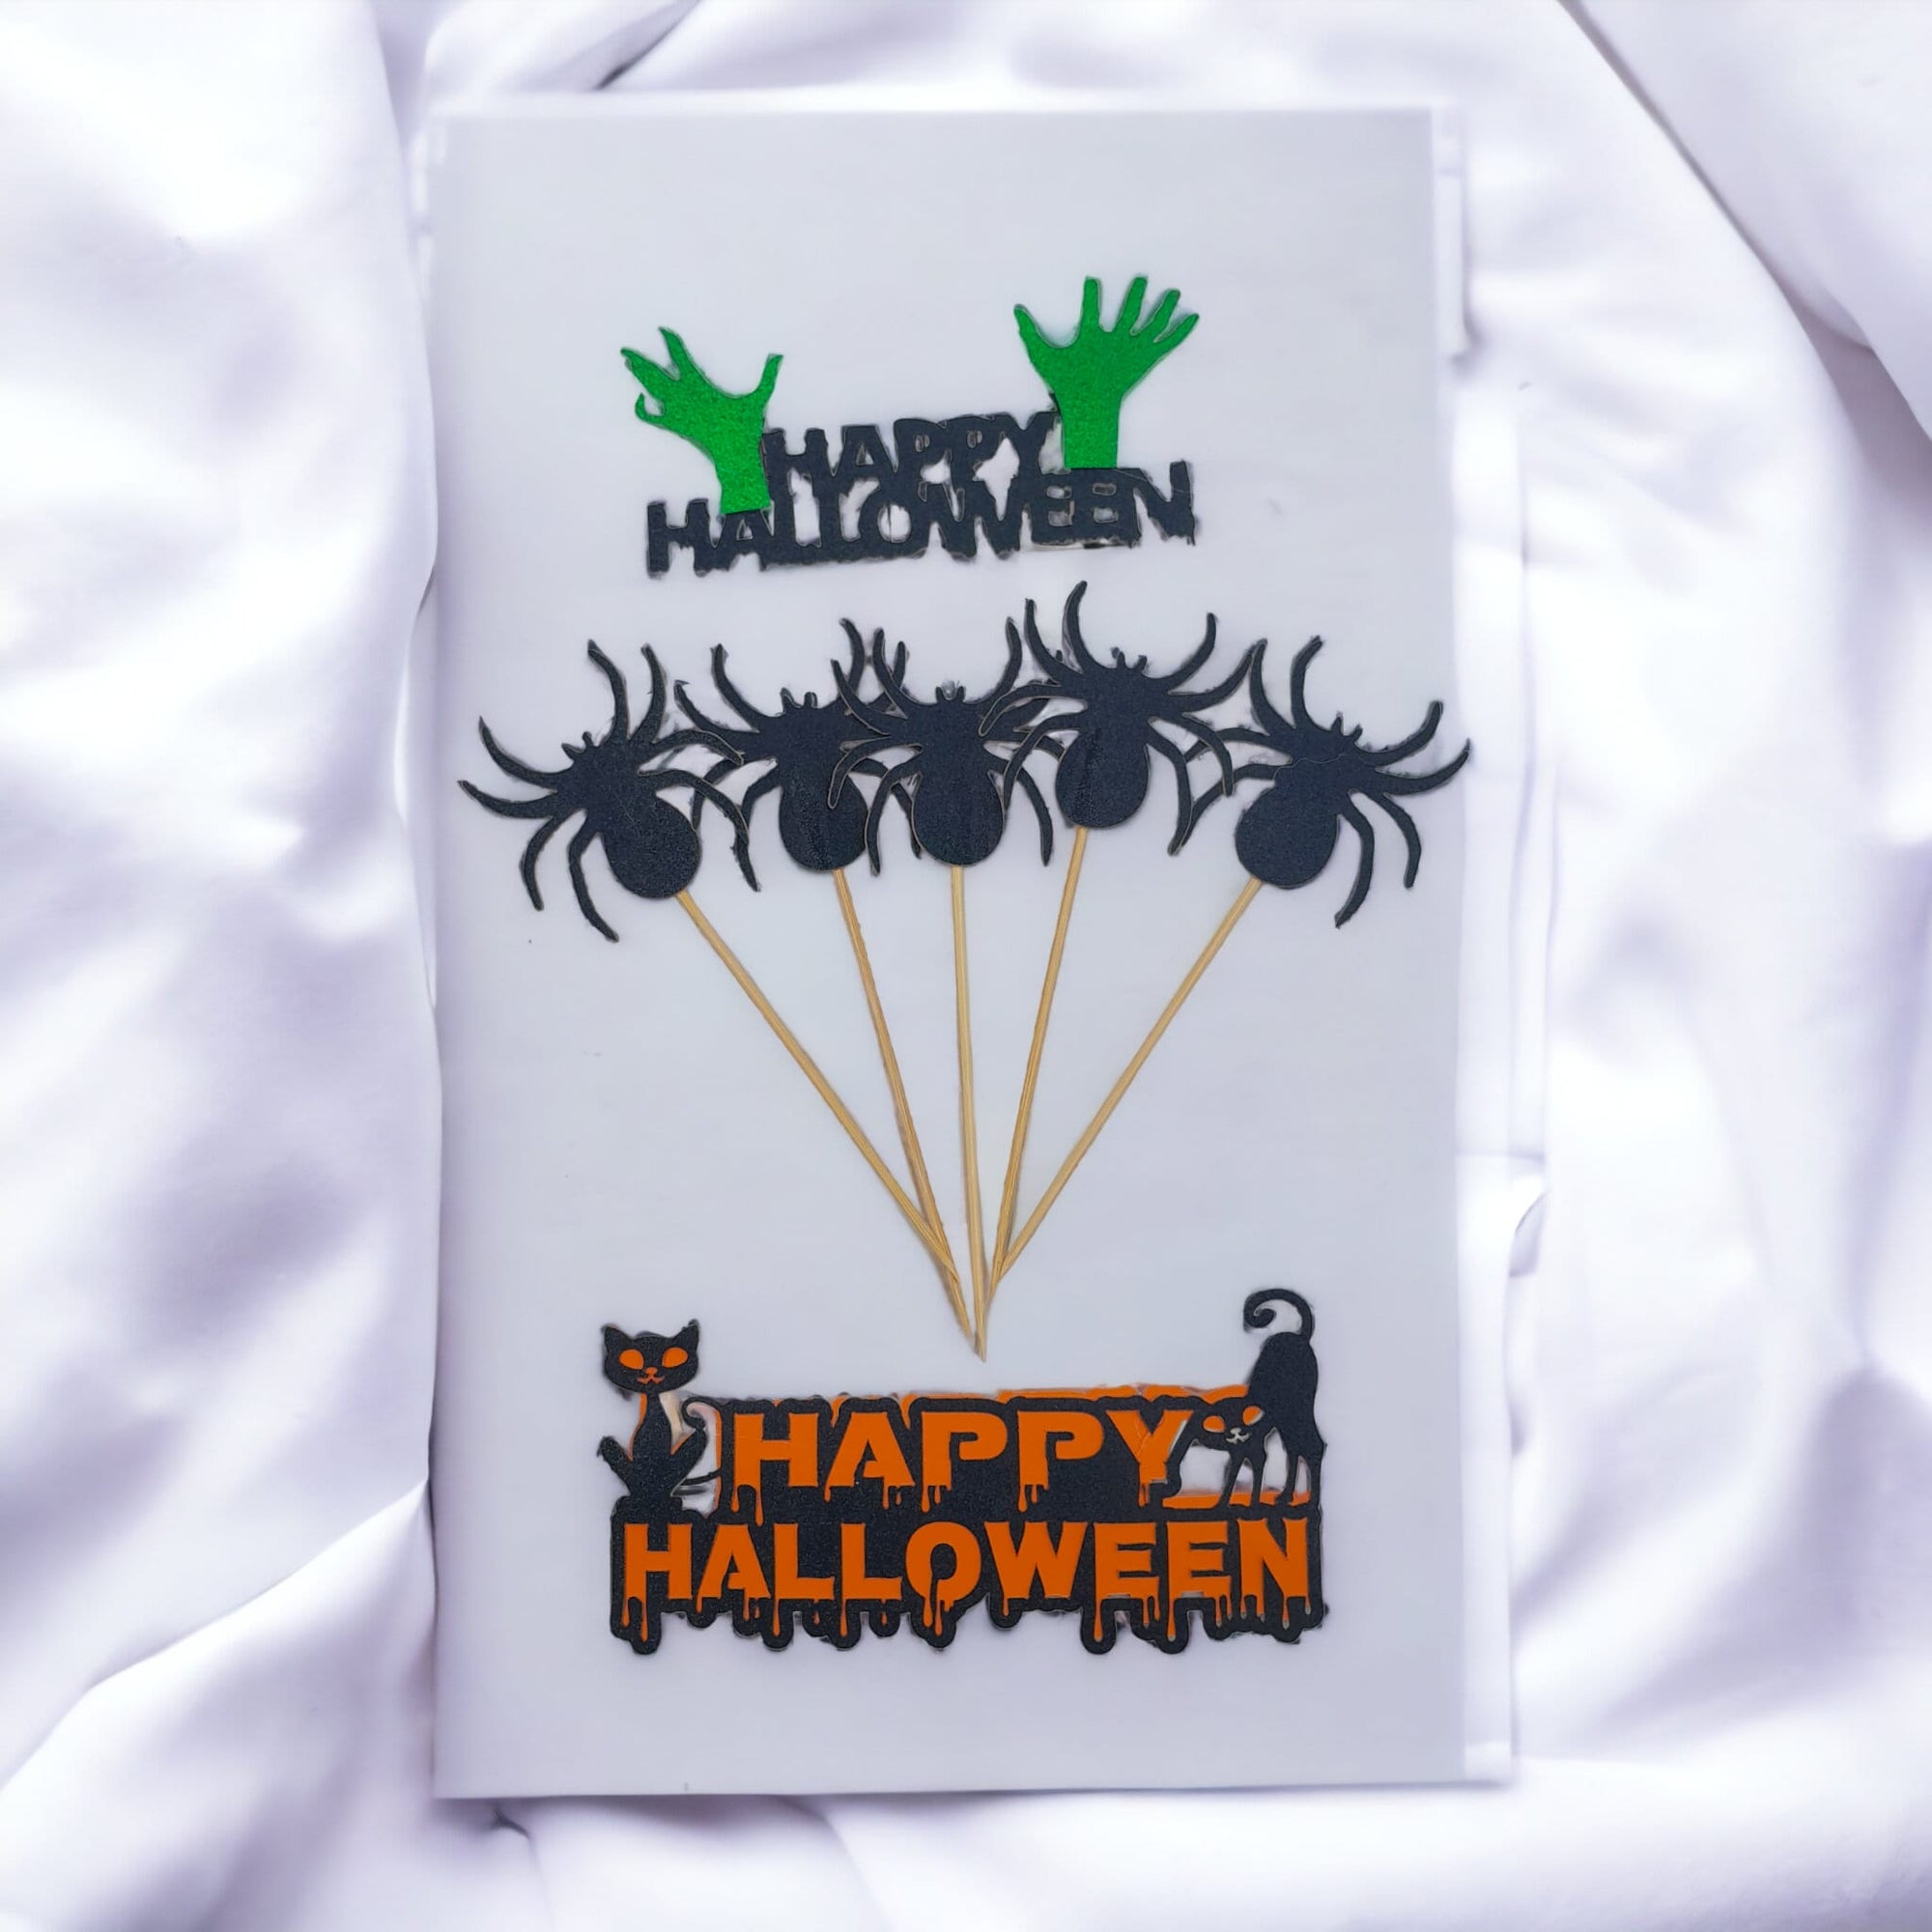 Happy Halloween Set Of 7 Card Toppers, Spiders Halloween Theme Cake Toppers